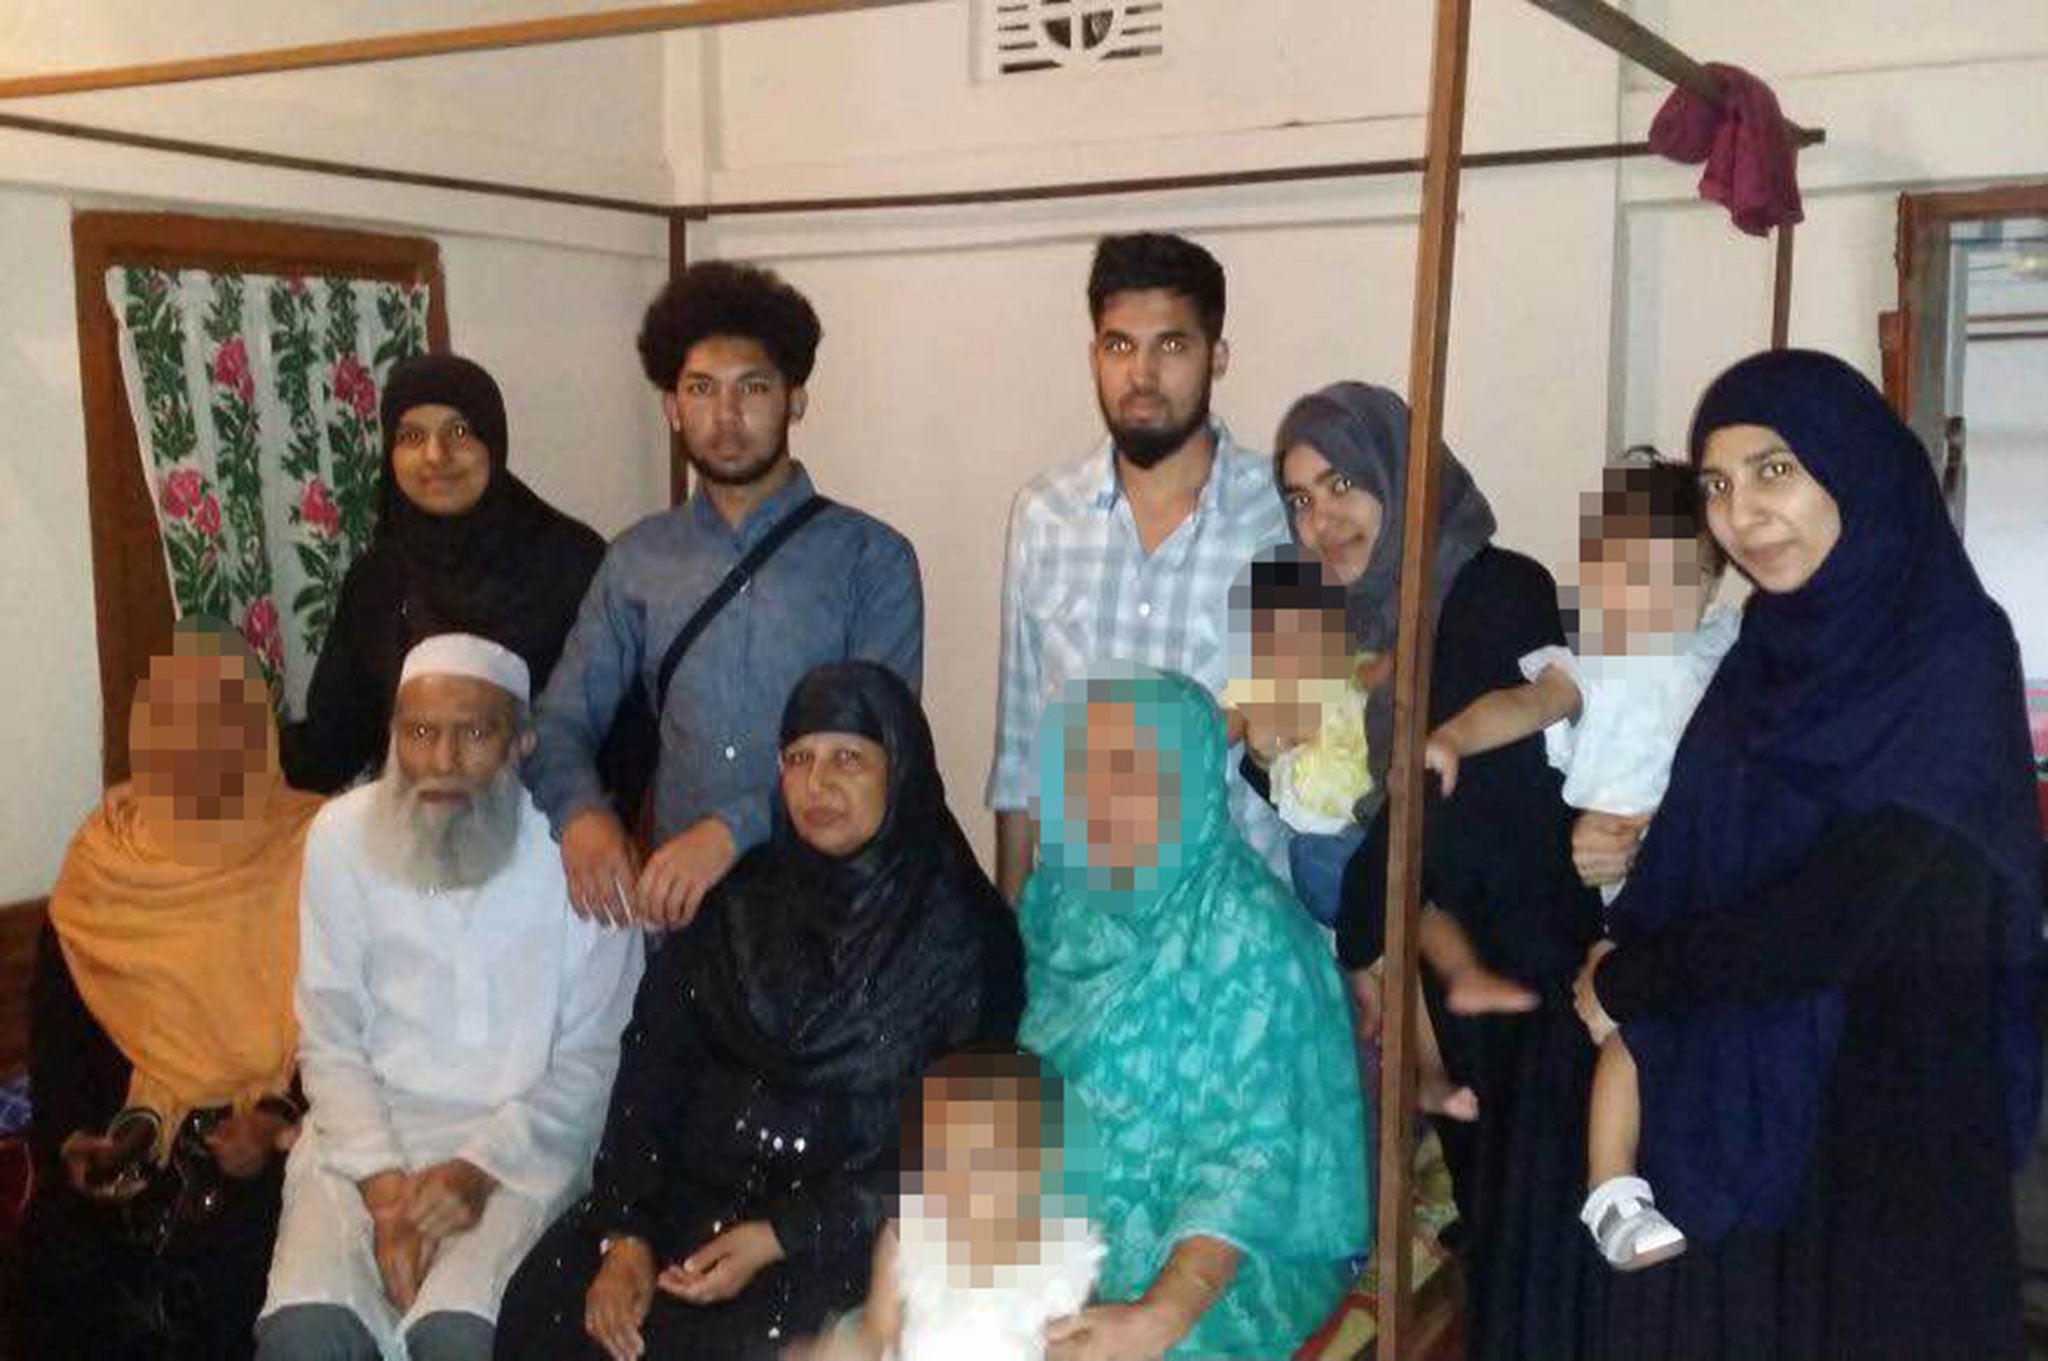 The Mannans, from Luton, have fled to join Isis in Syria